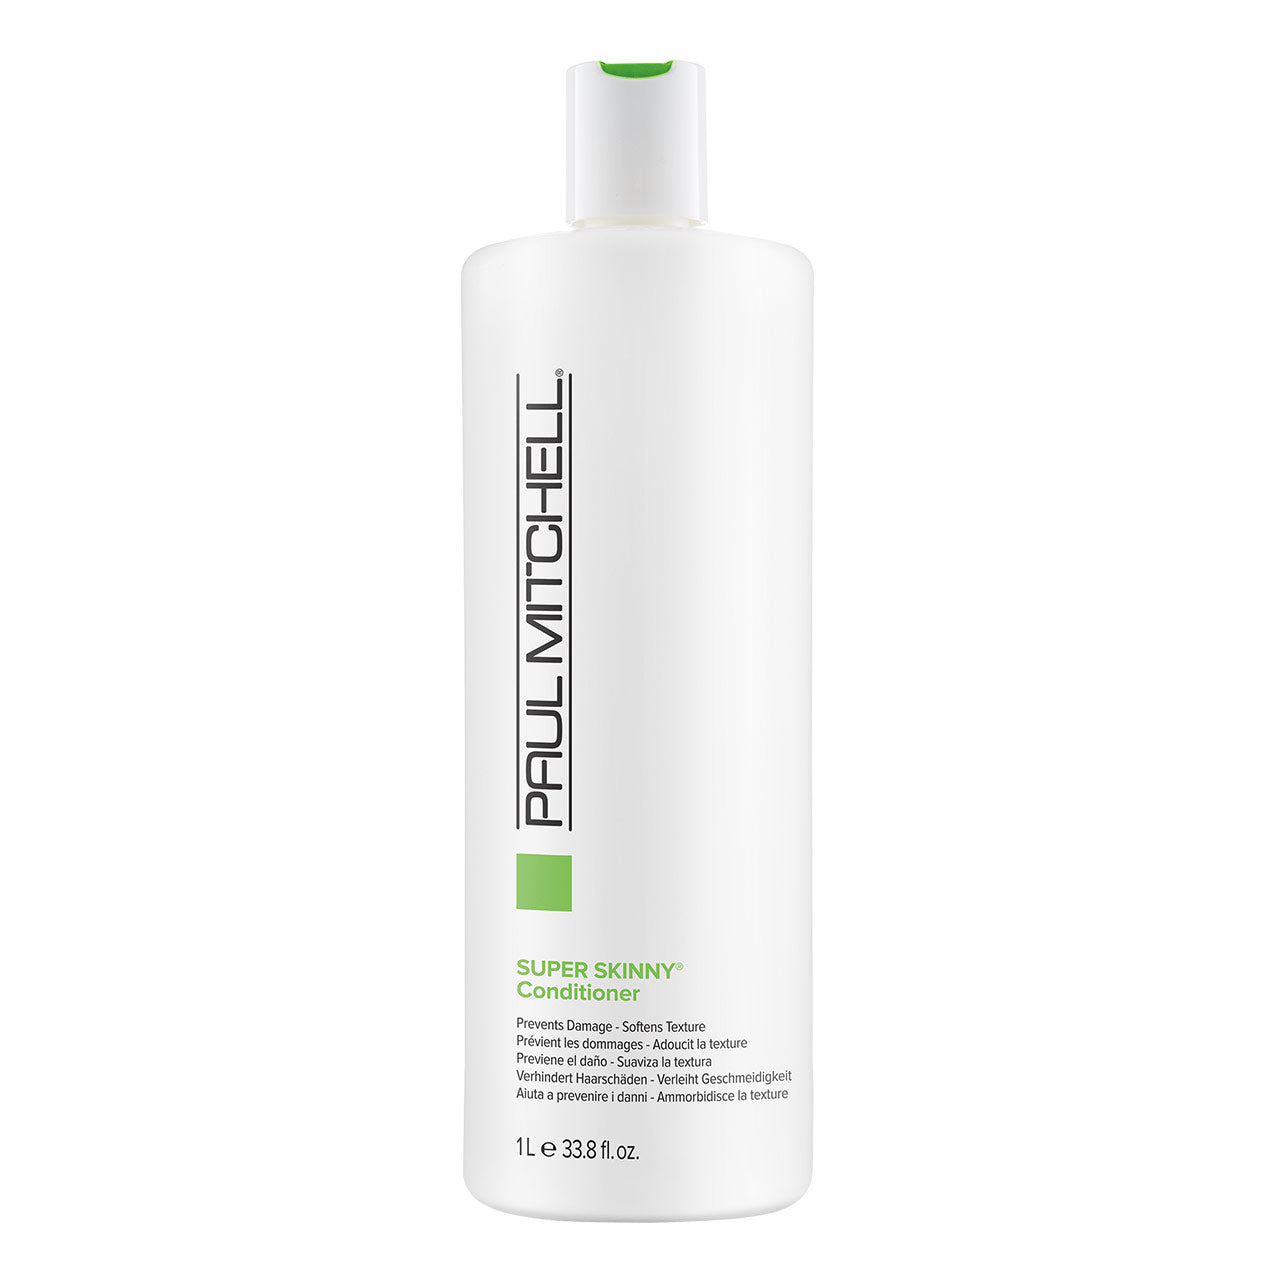 Smoothing Super Skinny Conditioner - 1L - by Paul Mitchell |ProCare Outlet|